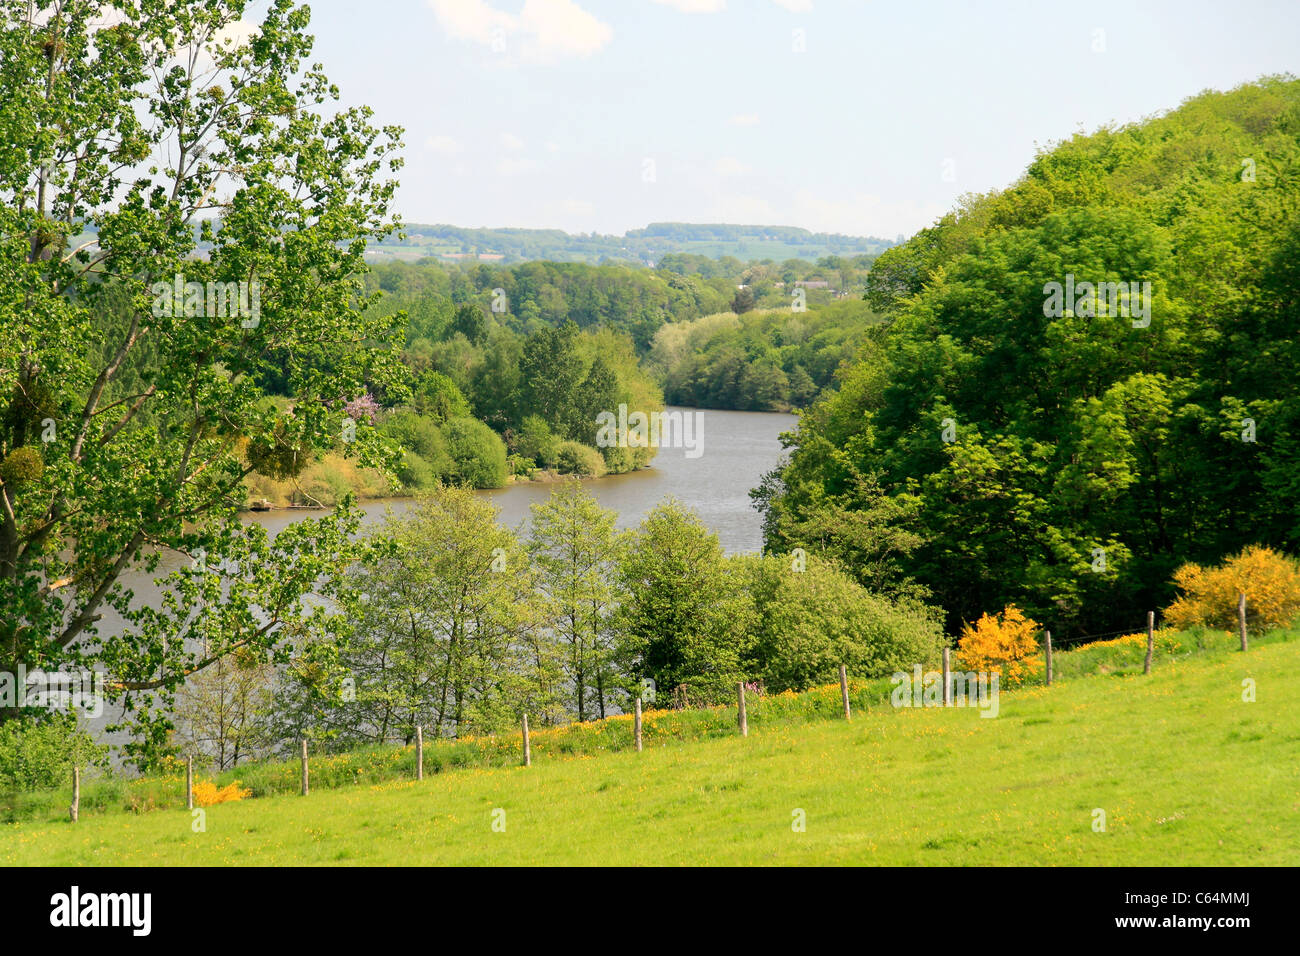 A river in a wooded valley in the spring (River la Mayenne, north of Mayenne, France). Stock Photo